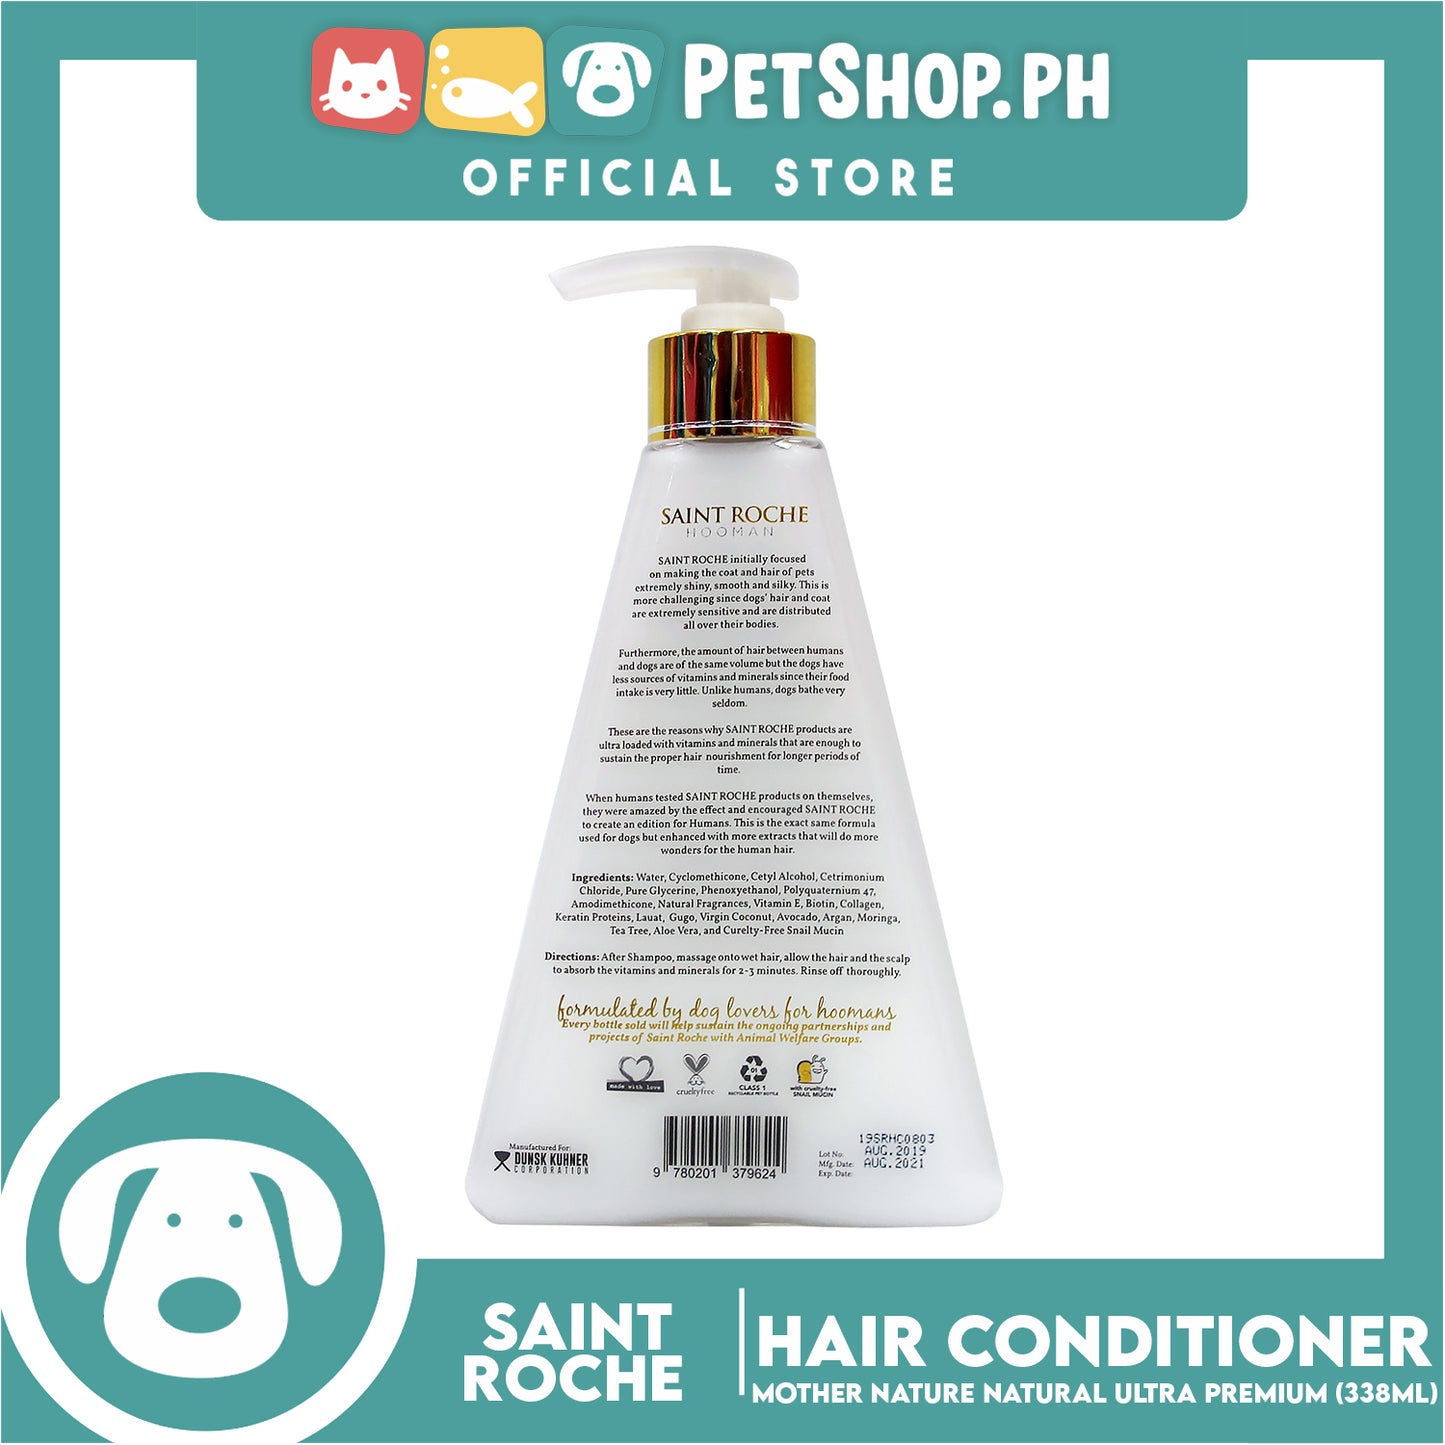 Saint Roche Hooman Conditioner Mother Nature 338ml Skin and Coat for Your Dogs